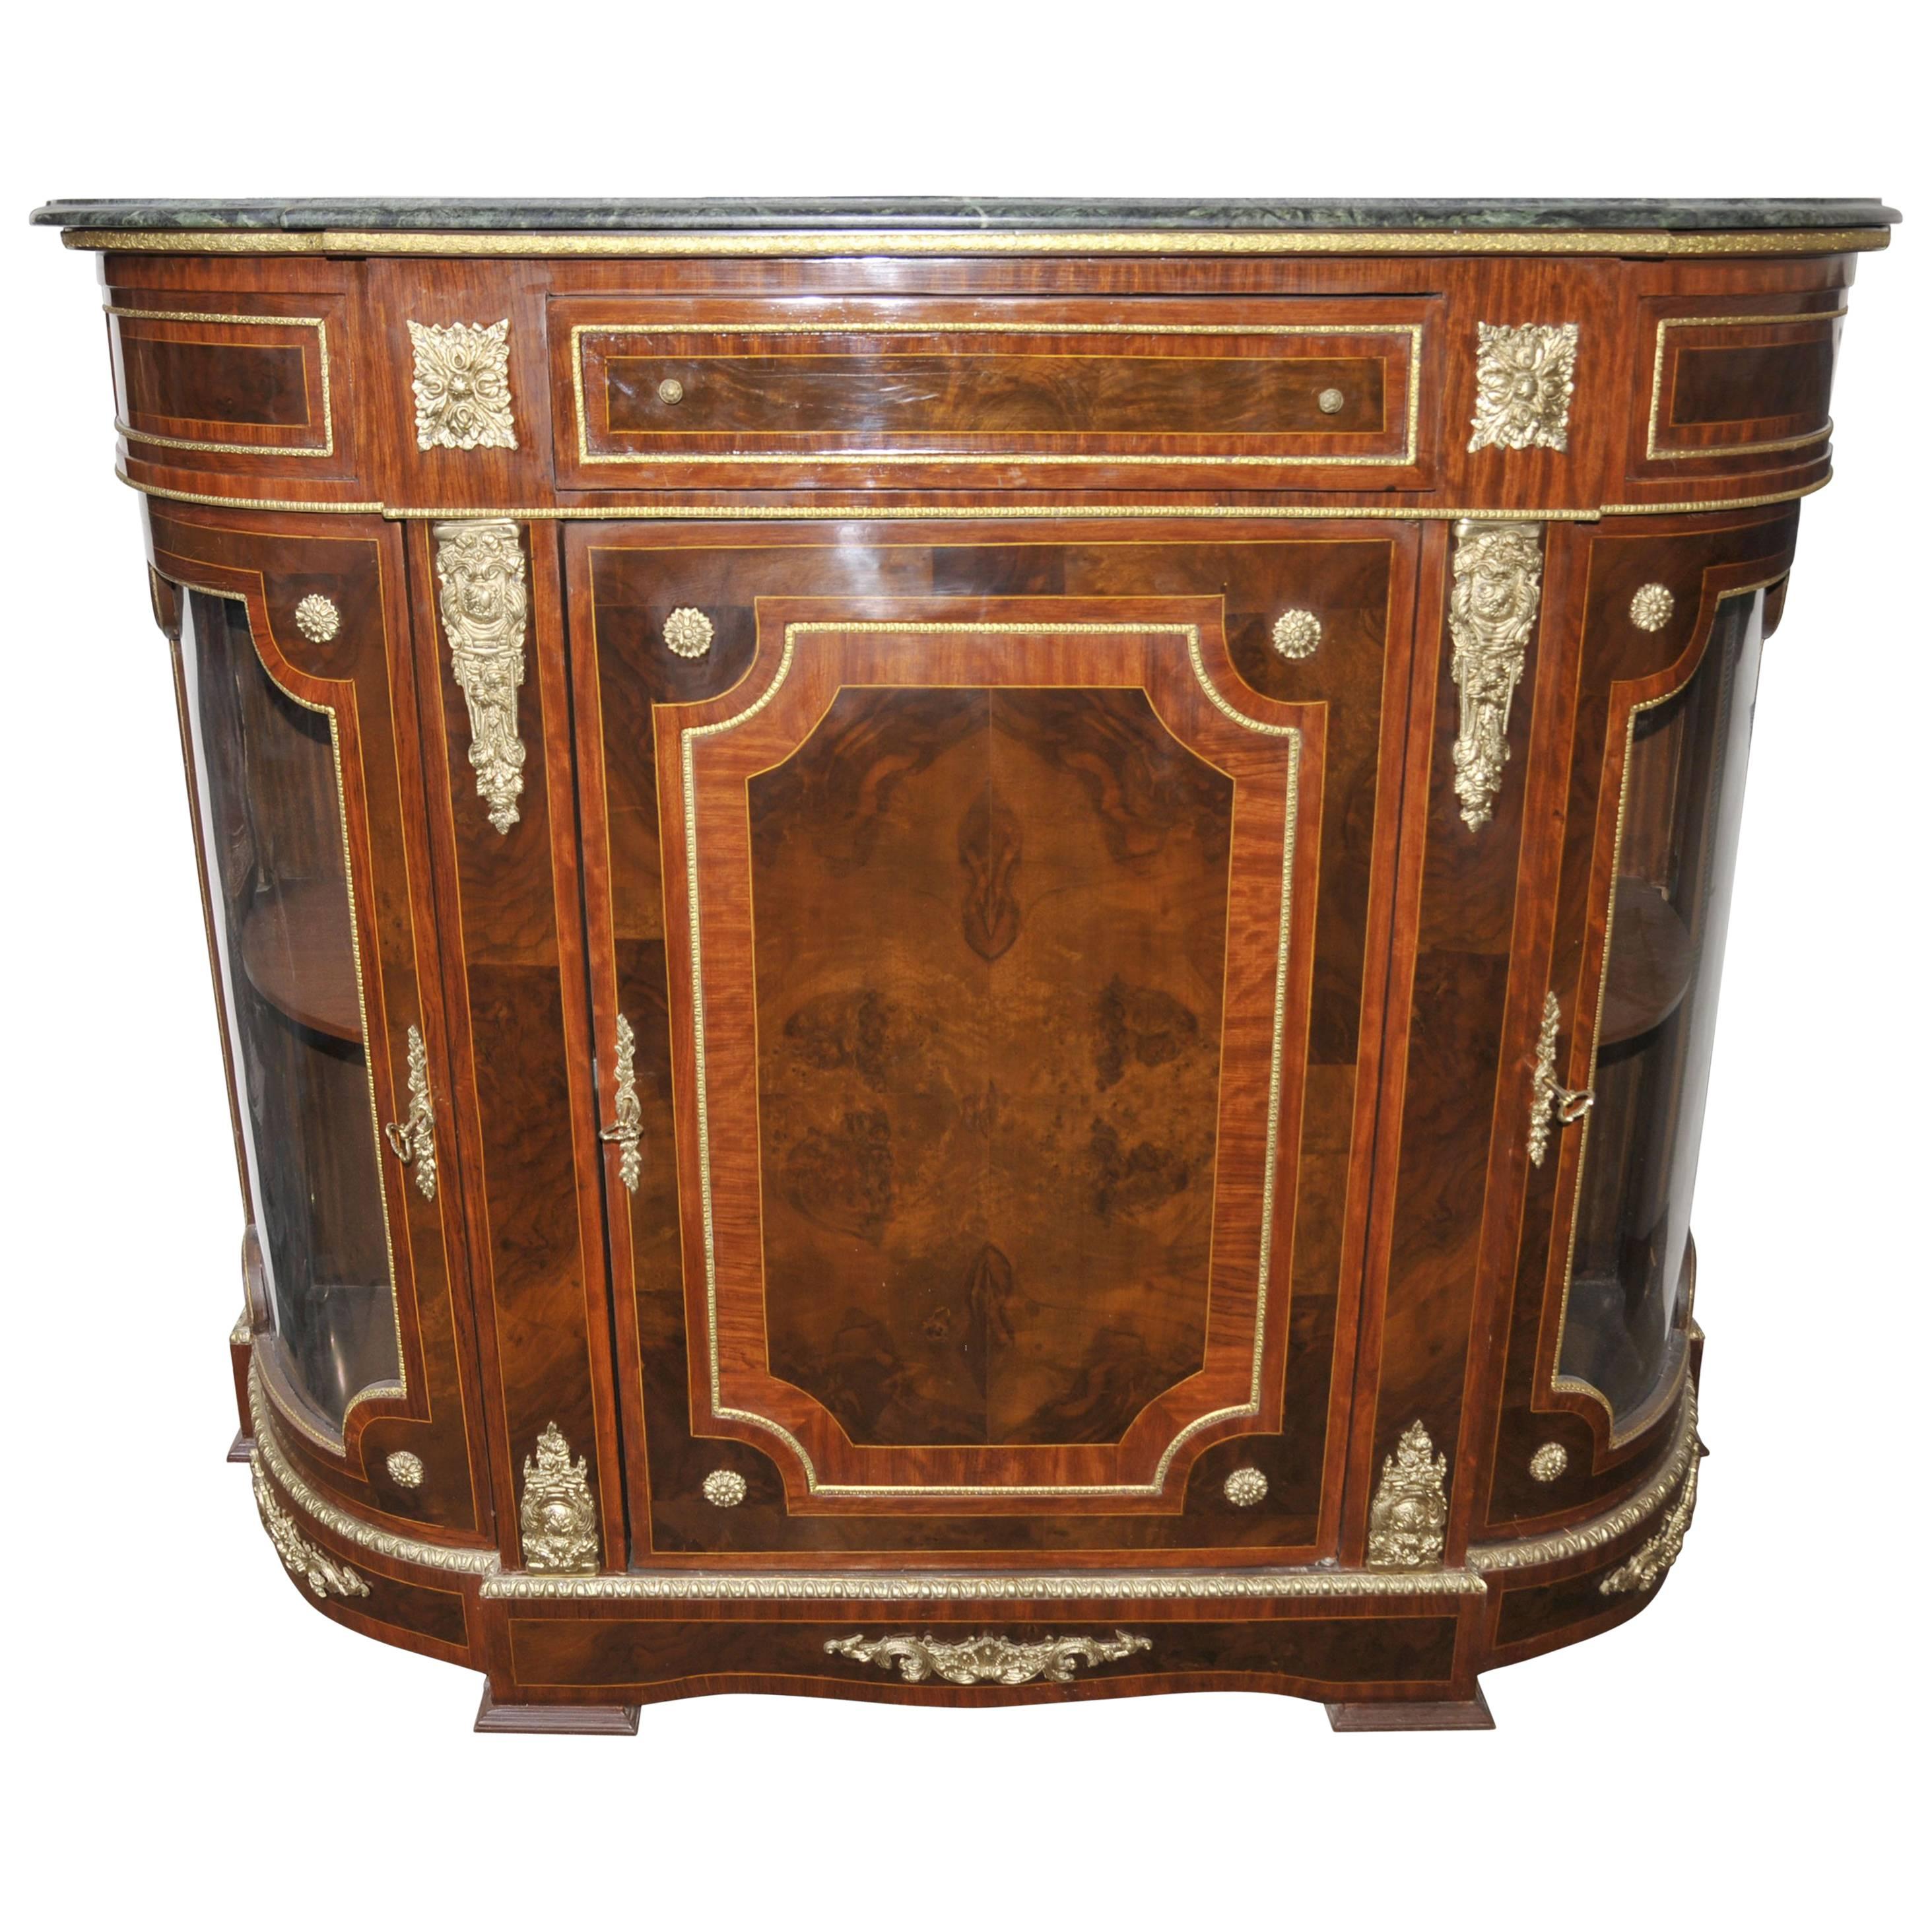  French Empire Style Cabinet Sideboard Kingwood Marble Top For Sale